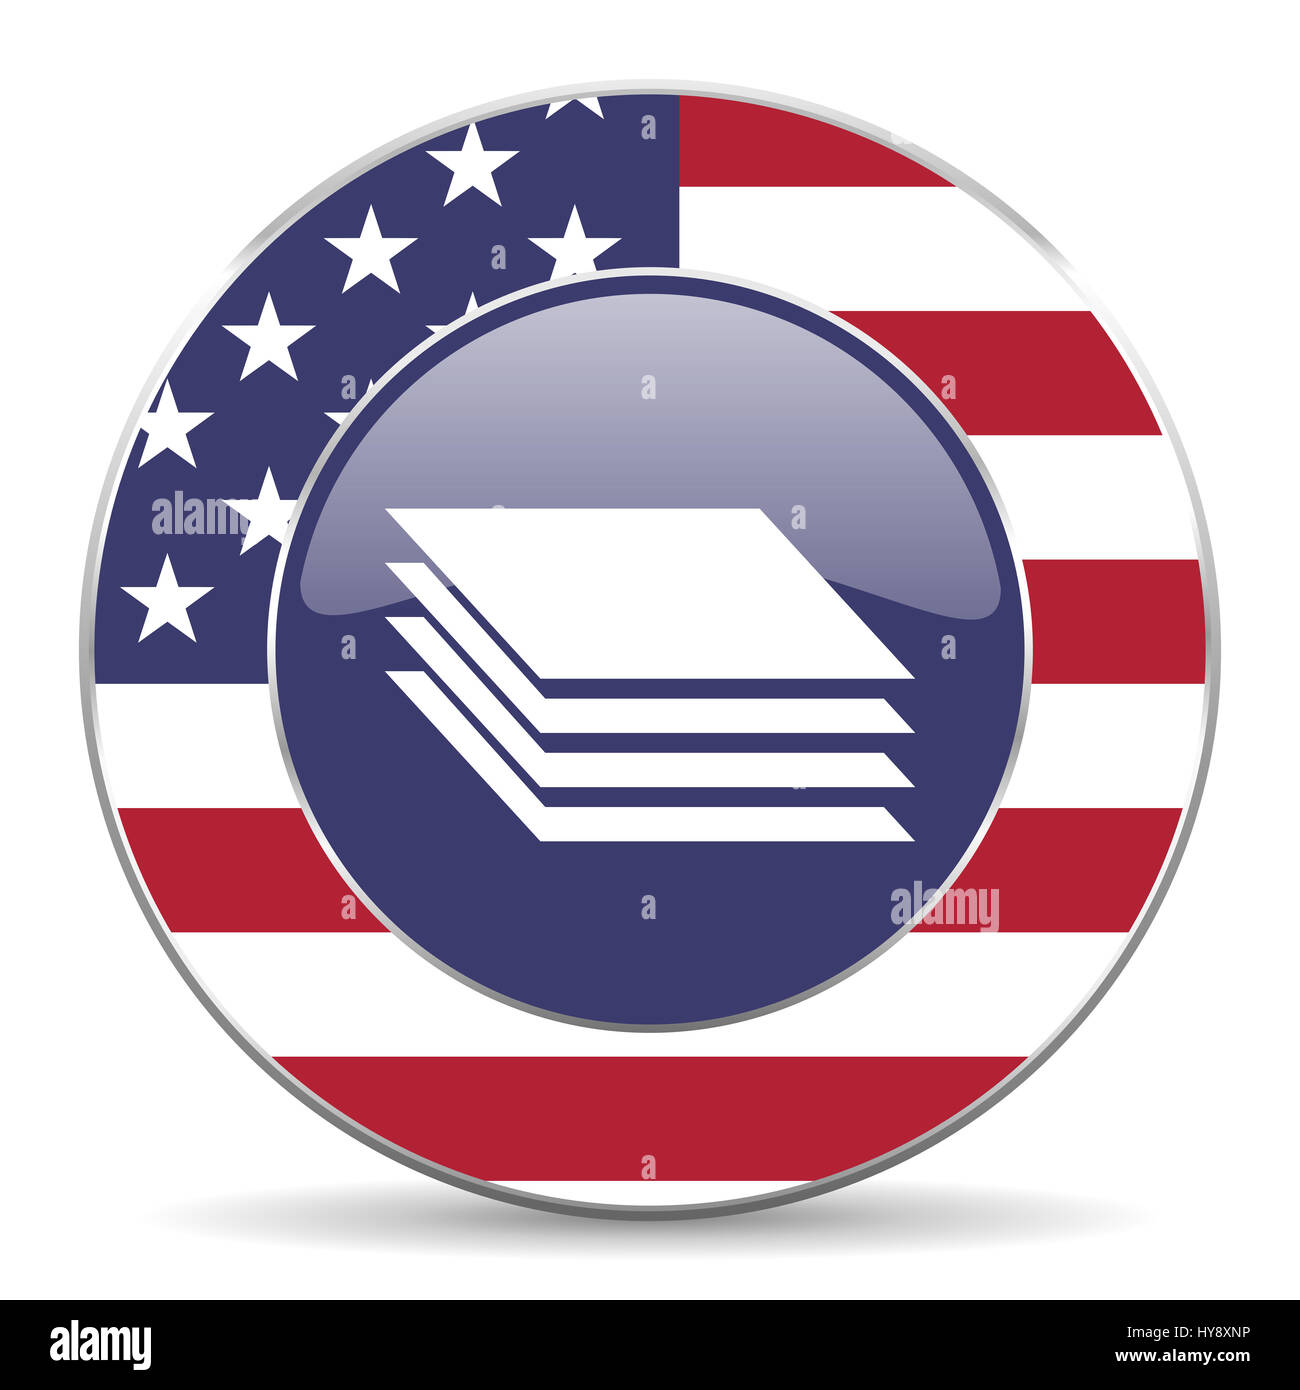 Layers usa design web american round internet icon with shadow on white background. Stock Photo